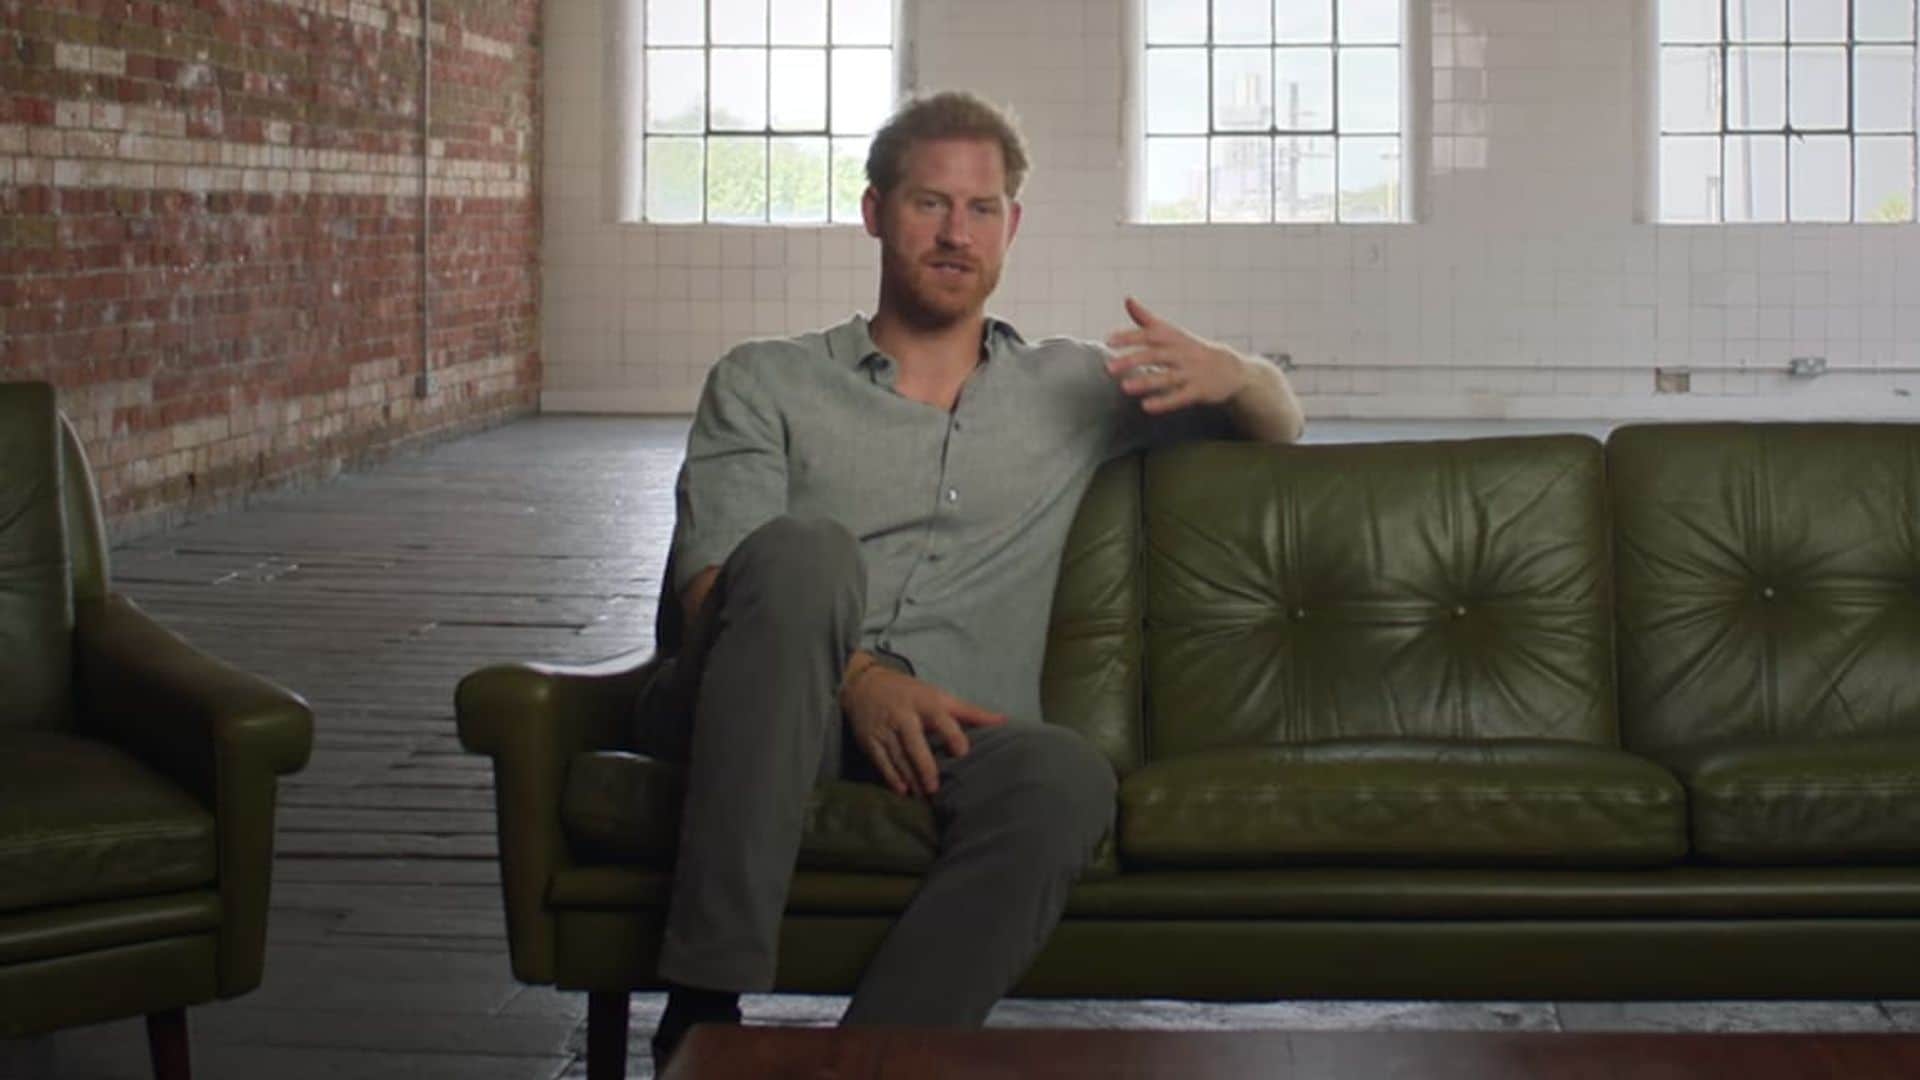 Prince Harry’s latest project is a Netflix documentary about the Paralympic games